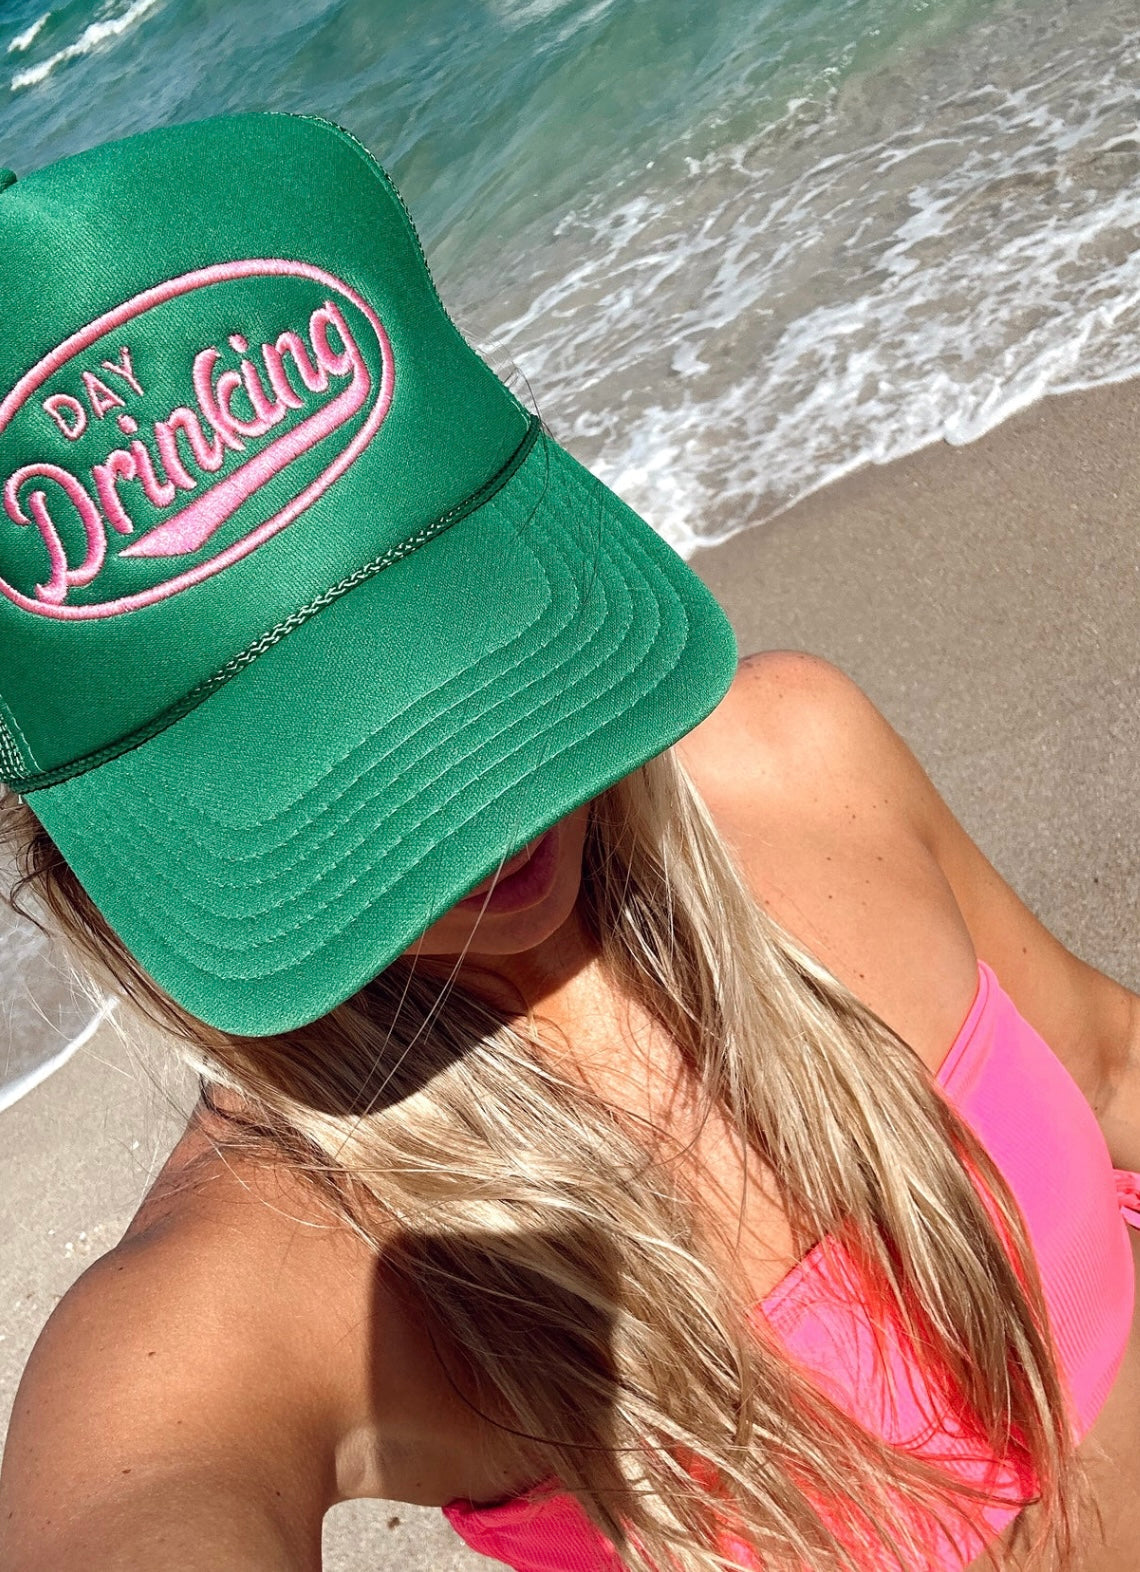 Get ready to kick back and relax with our Support Day Drinking Trucker Hat! This green trucker hat with pink embroidery is the perfect accessory for sipping cocktails by the pool. Embrace the fun and carefree spirit of day drinking while looking stylish and supporting the cause. Cheers to that!